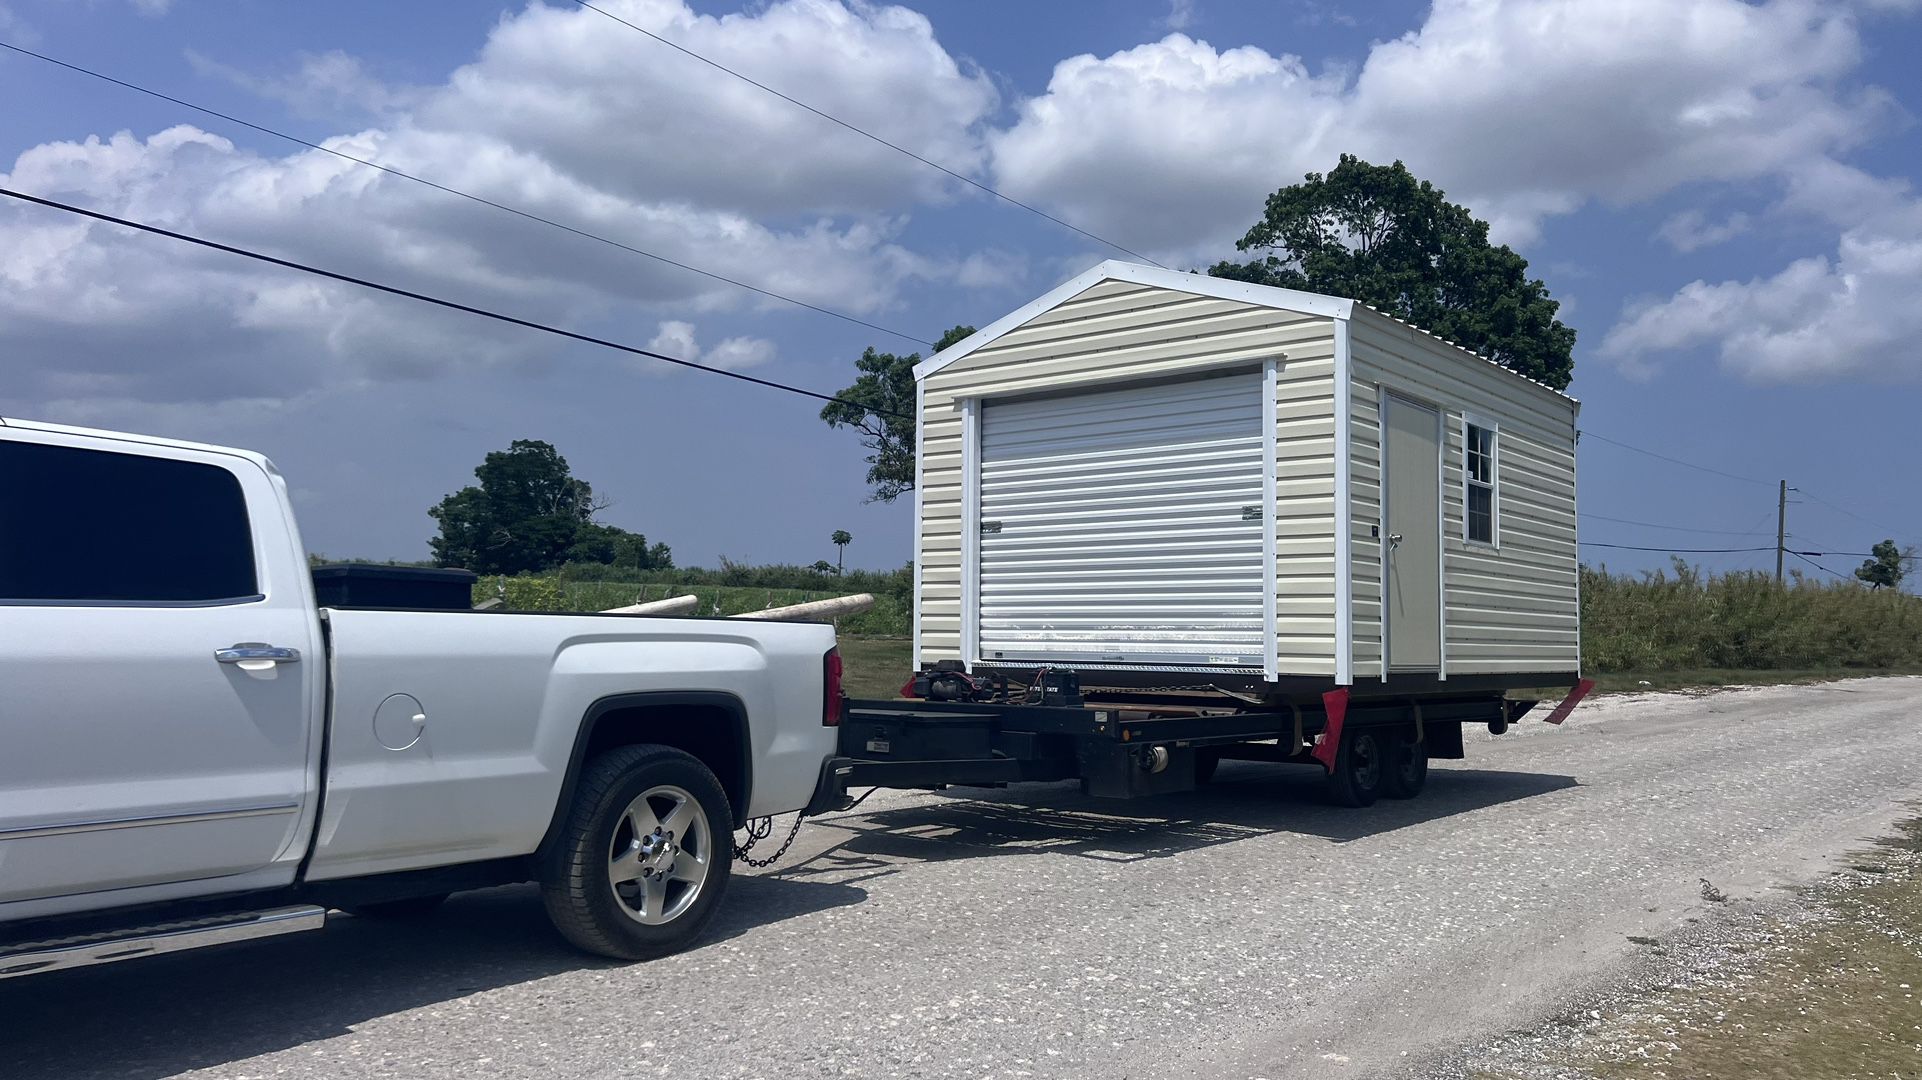 Sheds Muving Casita Relocated All Florida Rv Contains 